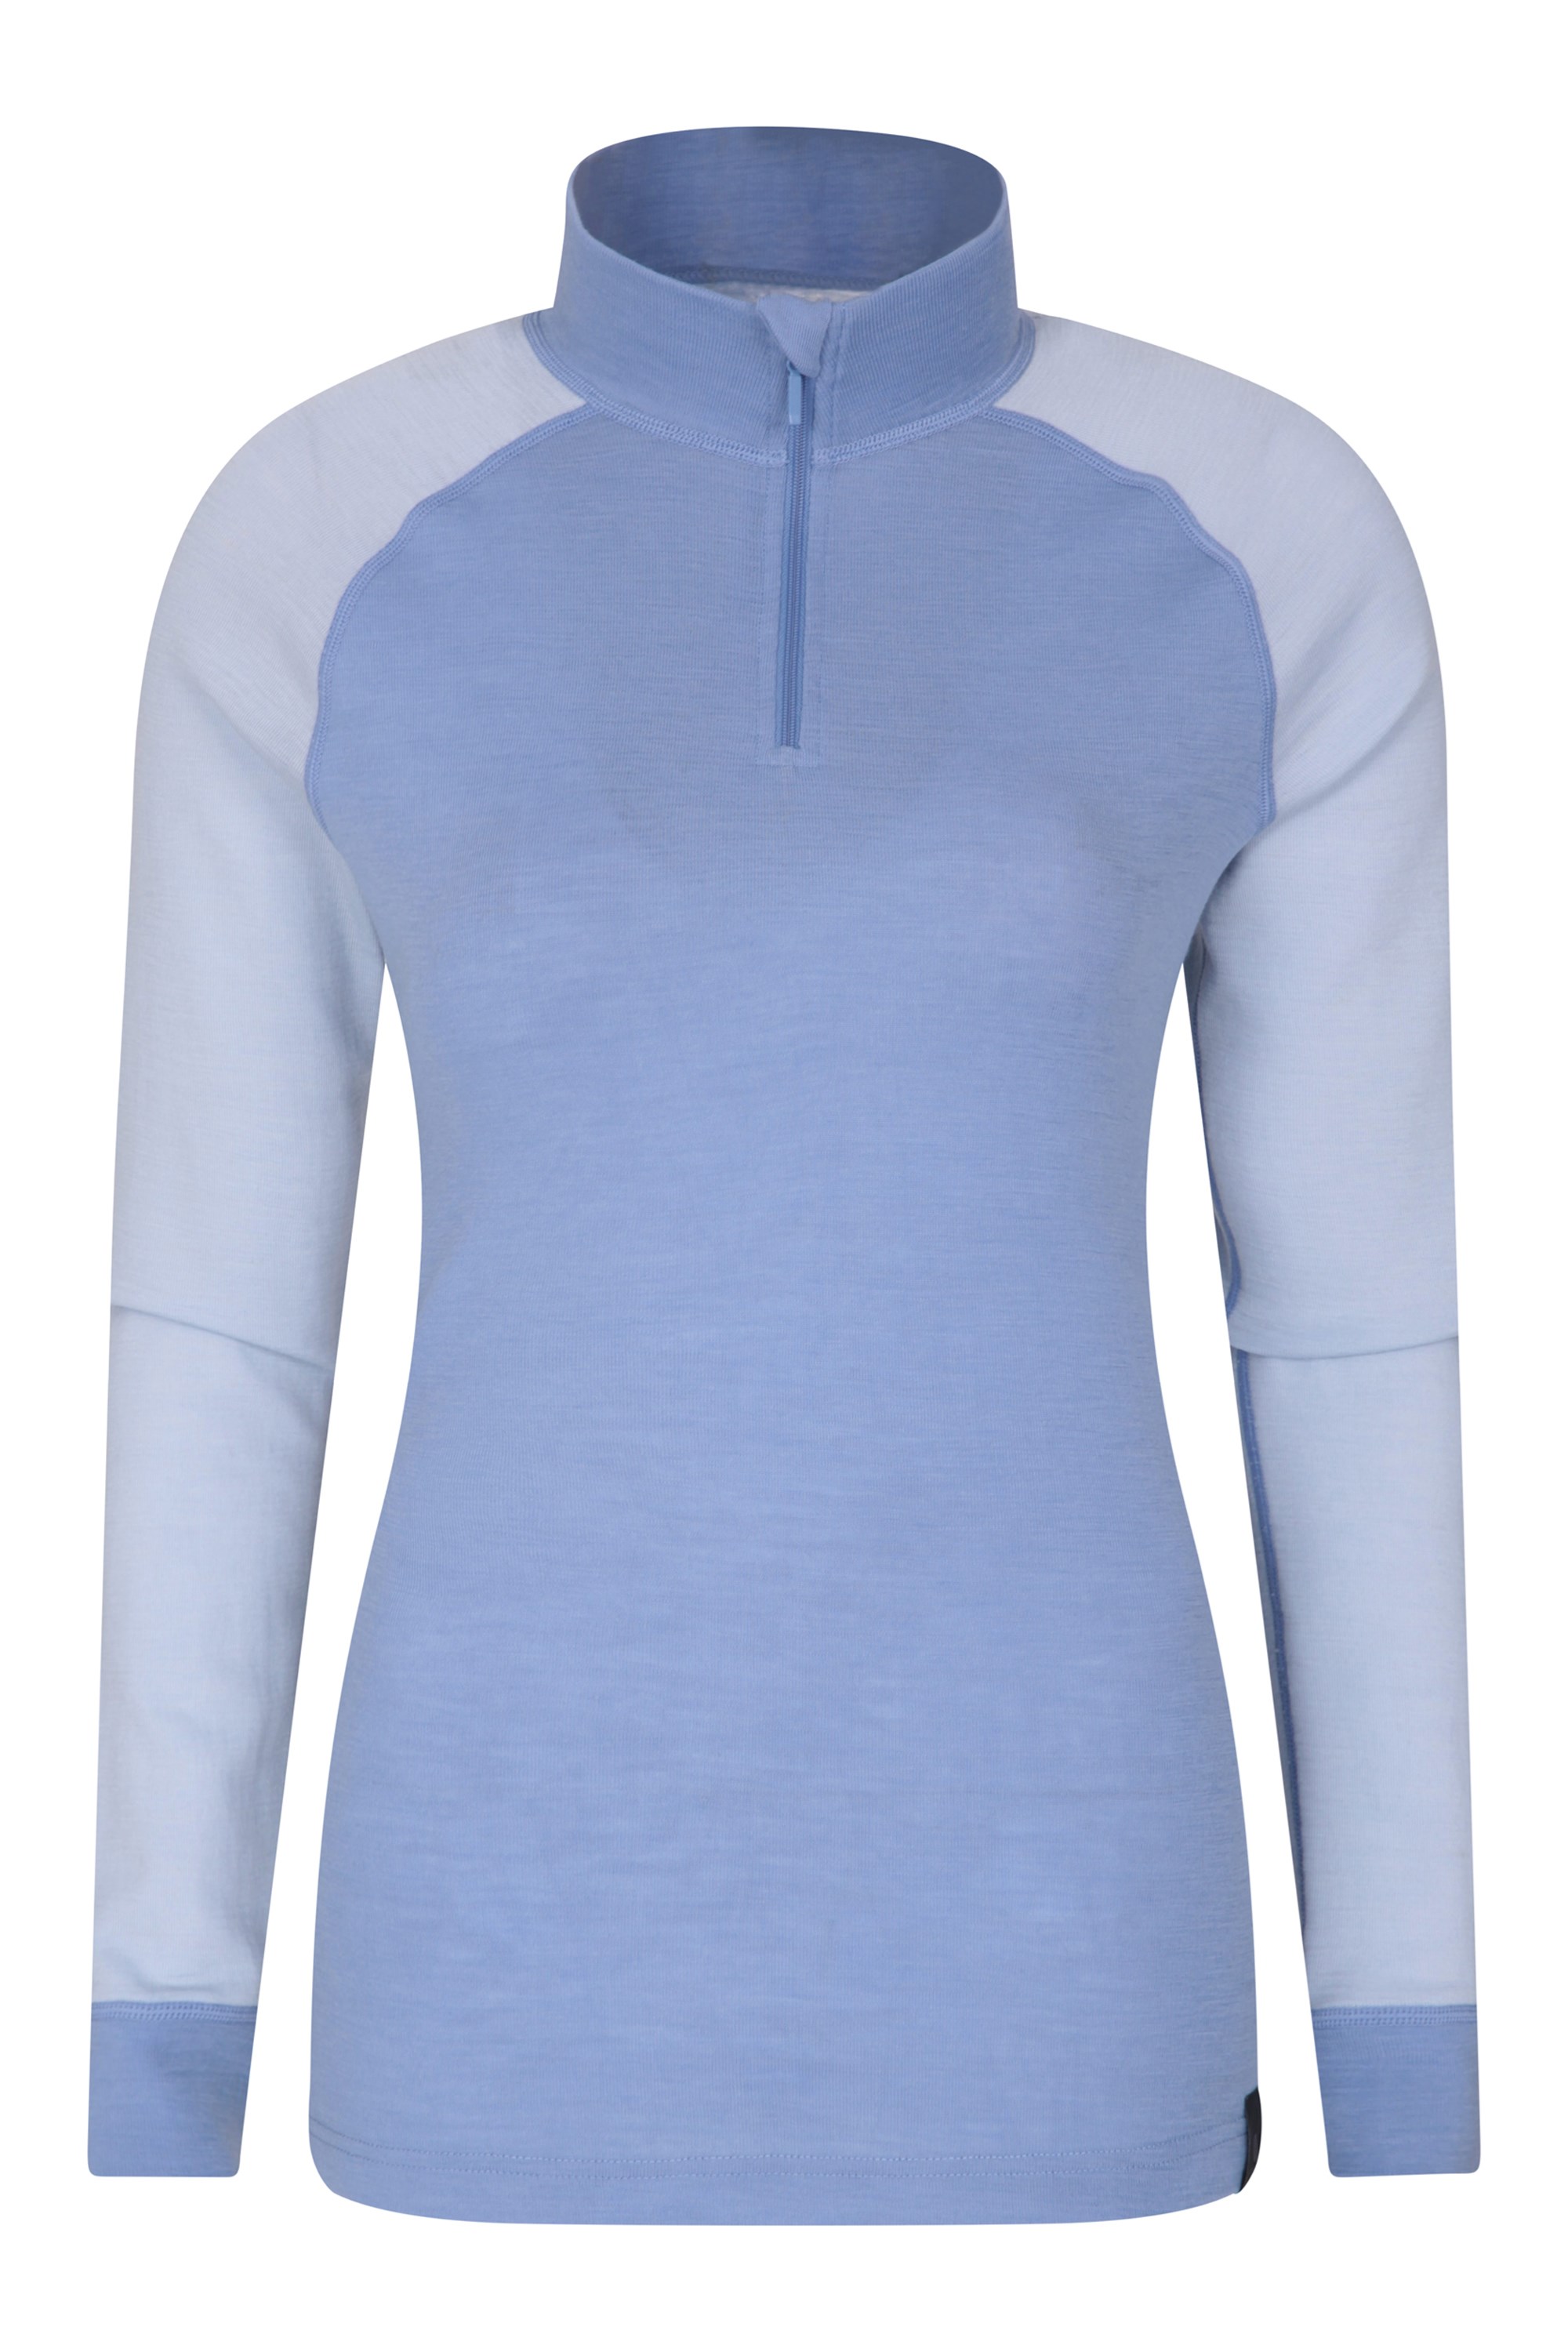 womens thermal tops